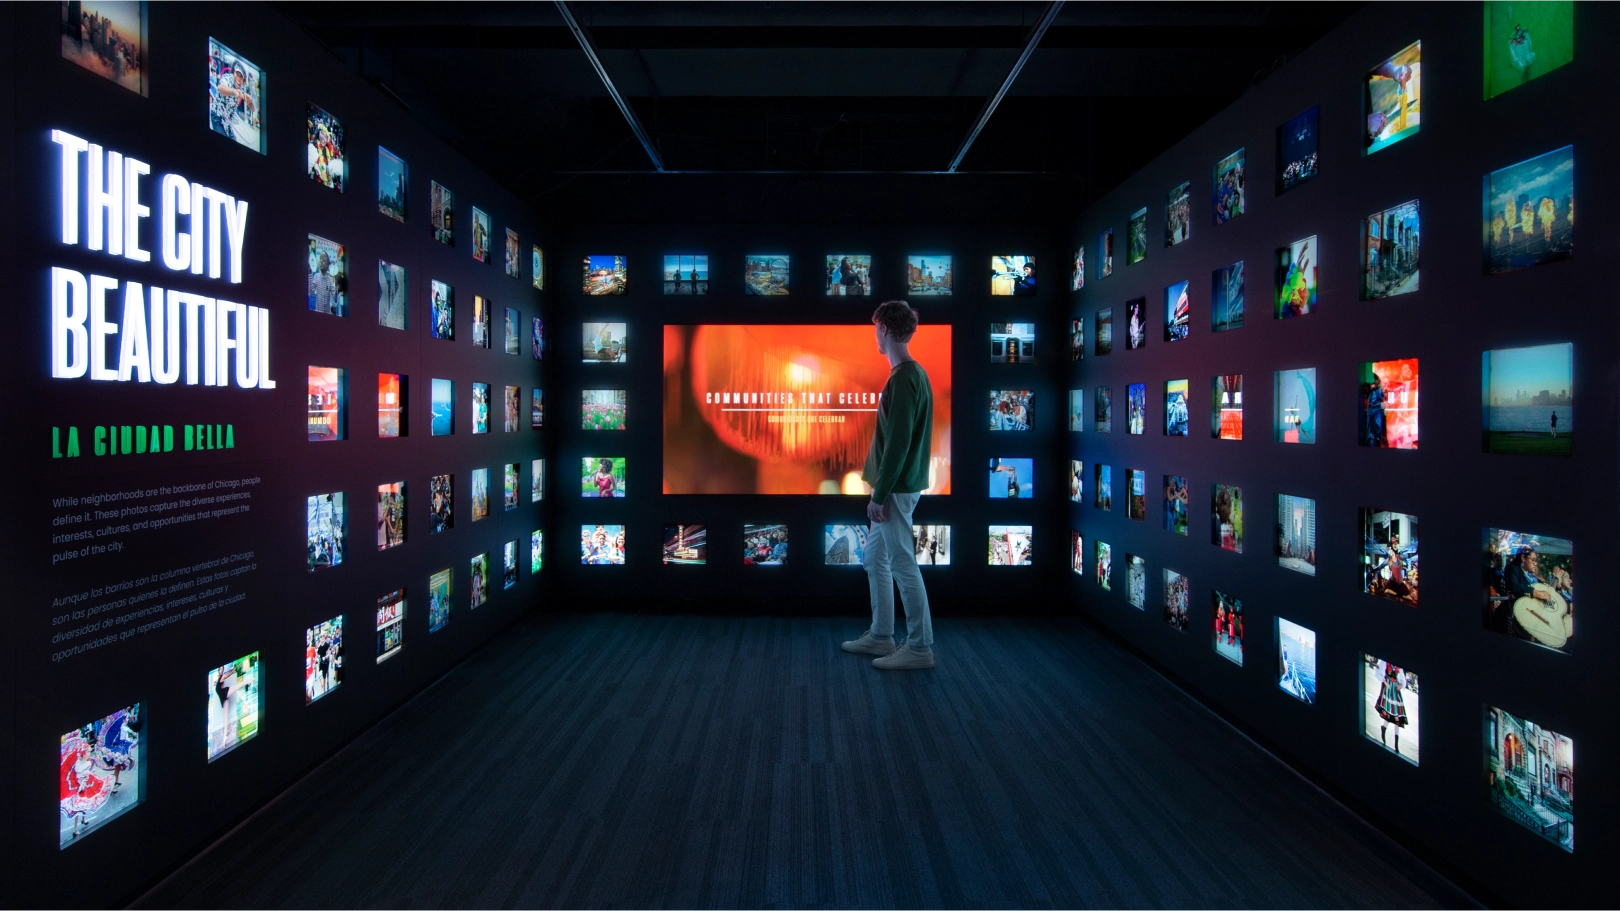 A person looking at The City Beautiful installation, with images in the space surrounding a large screen